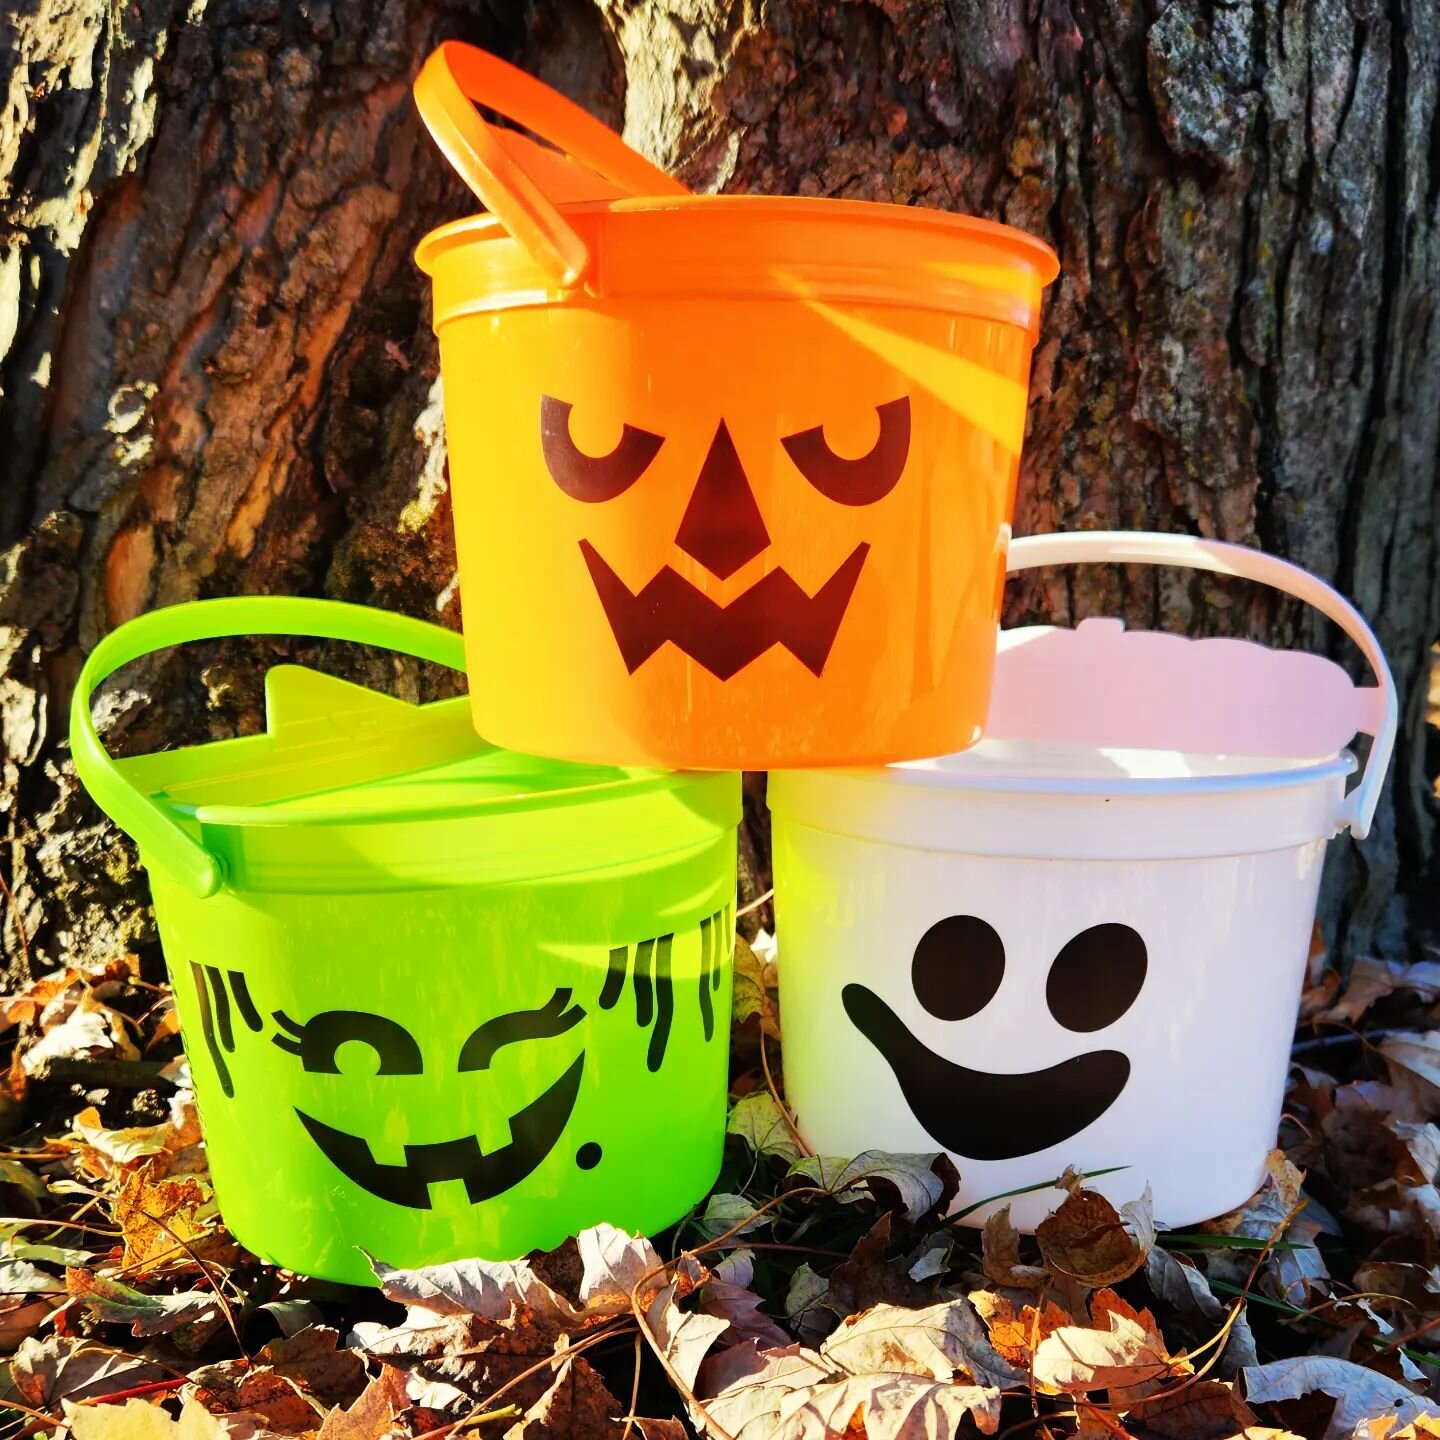 Obligatory &quot;I got'em all&quot; fall leaves and boo bucket shot!

Now excuse me while I stay away from @mcdonalds for the next 3- 6 months. 

#jm #halloween #boobuckets #mcdonalds #trickortreat #nostalgia #mcpunkn #mcgoblin #mcboo #mcfull #octobe